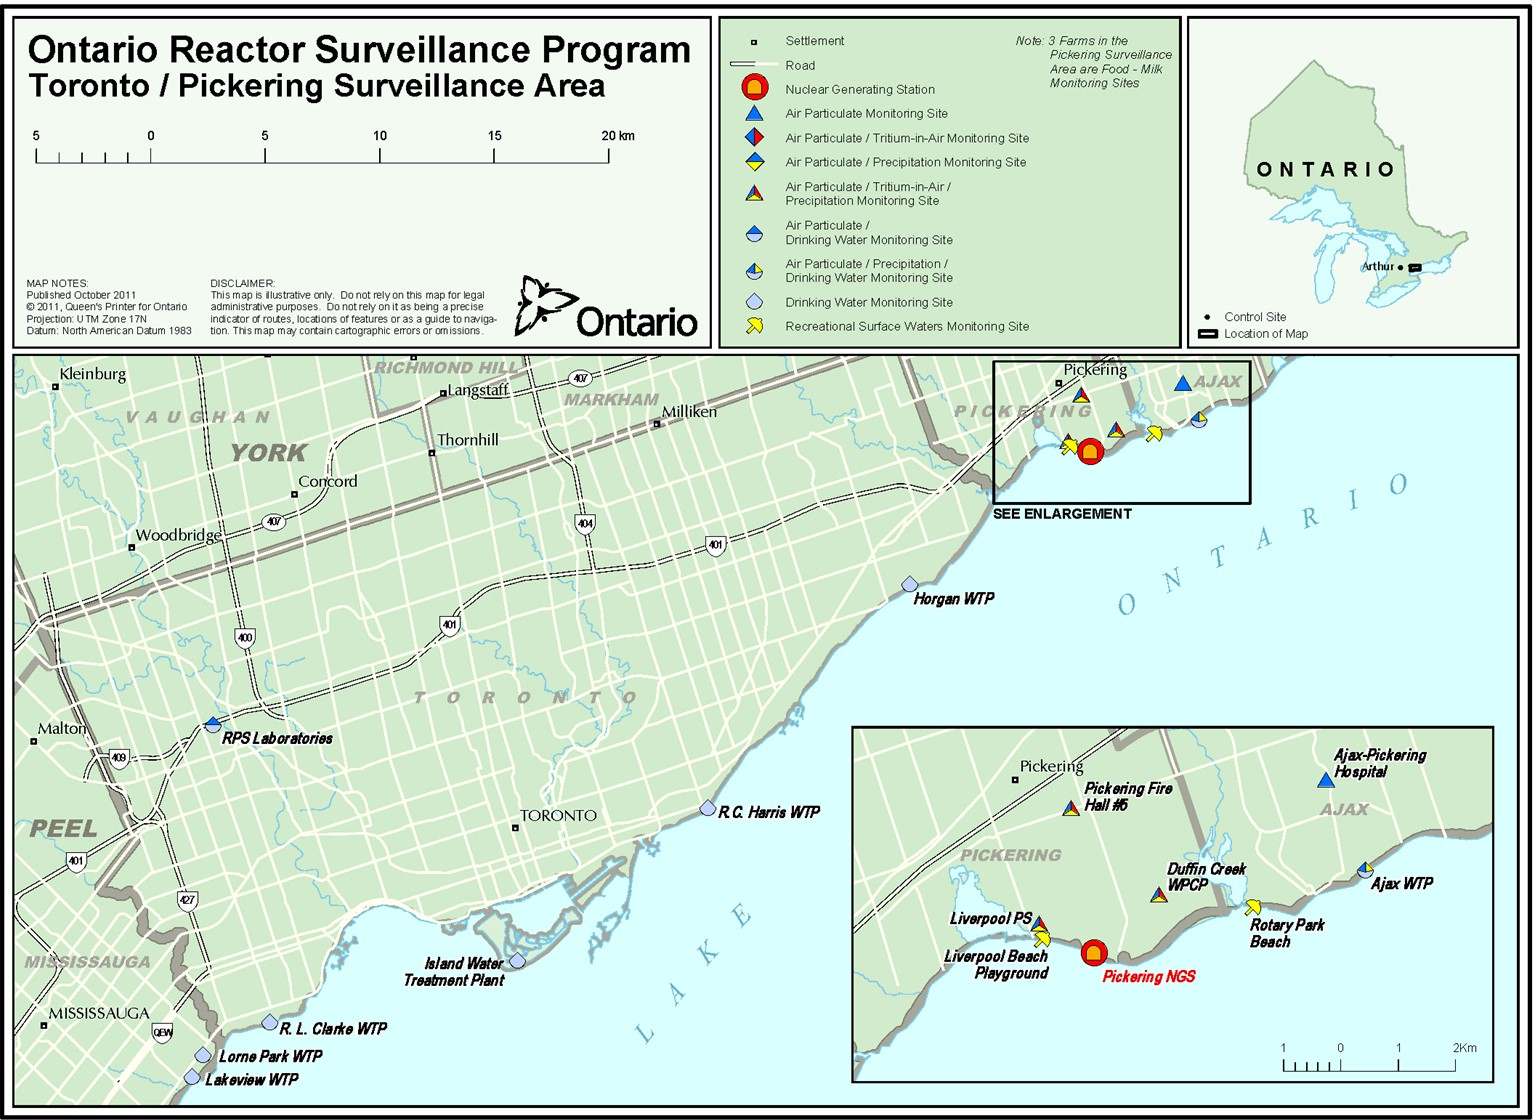 Inset map depicting the Toronto / Pickering Surveillance Area monitoring sites for air and drinking water from Ontario Reactor Surveillance Program.